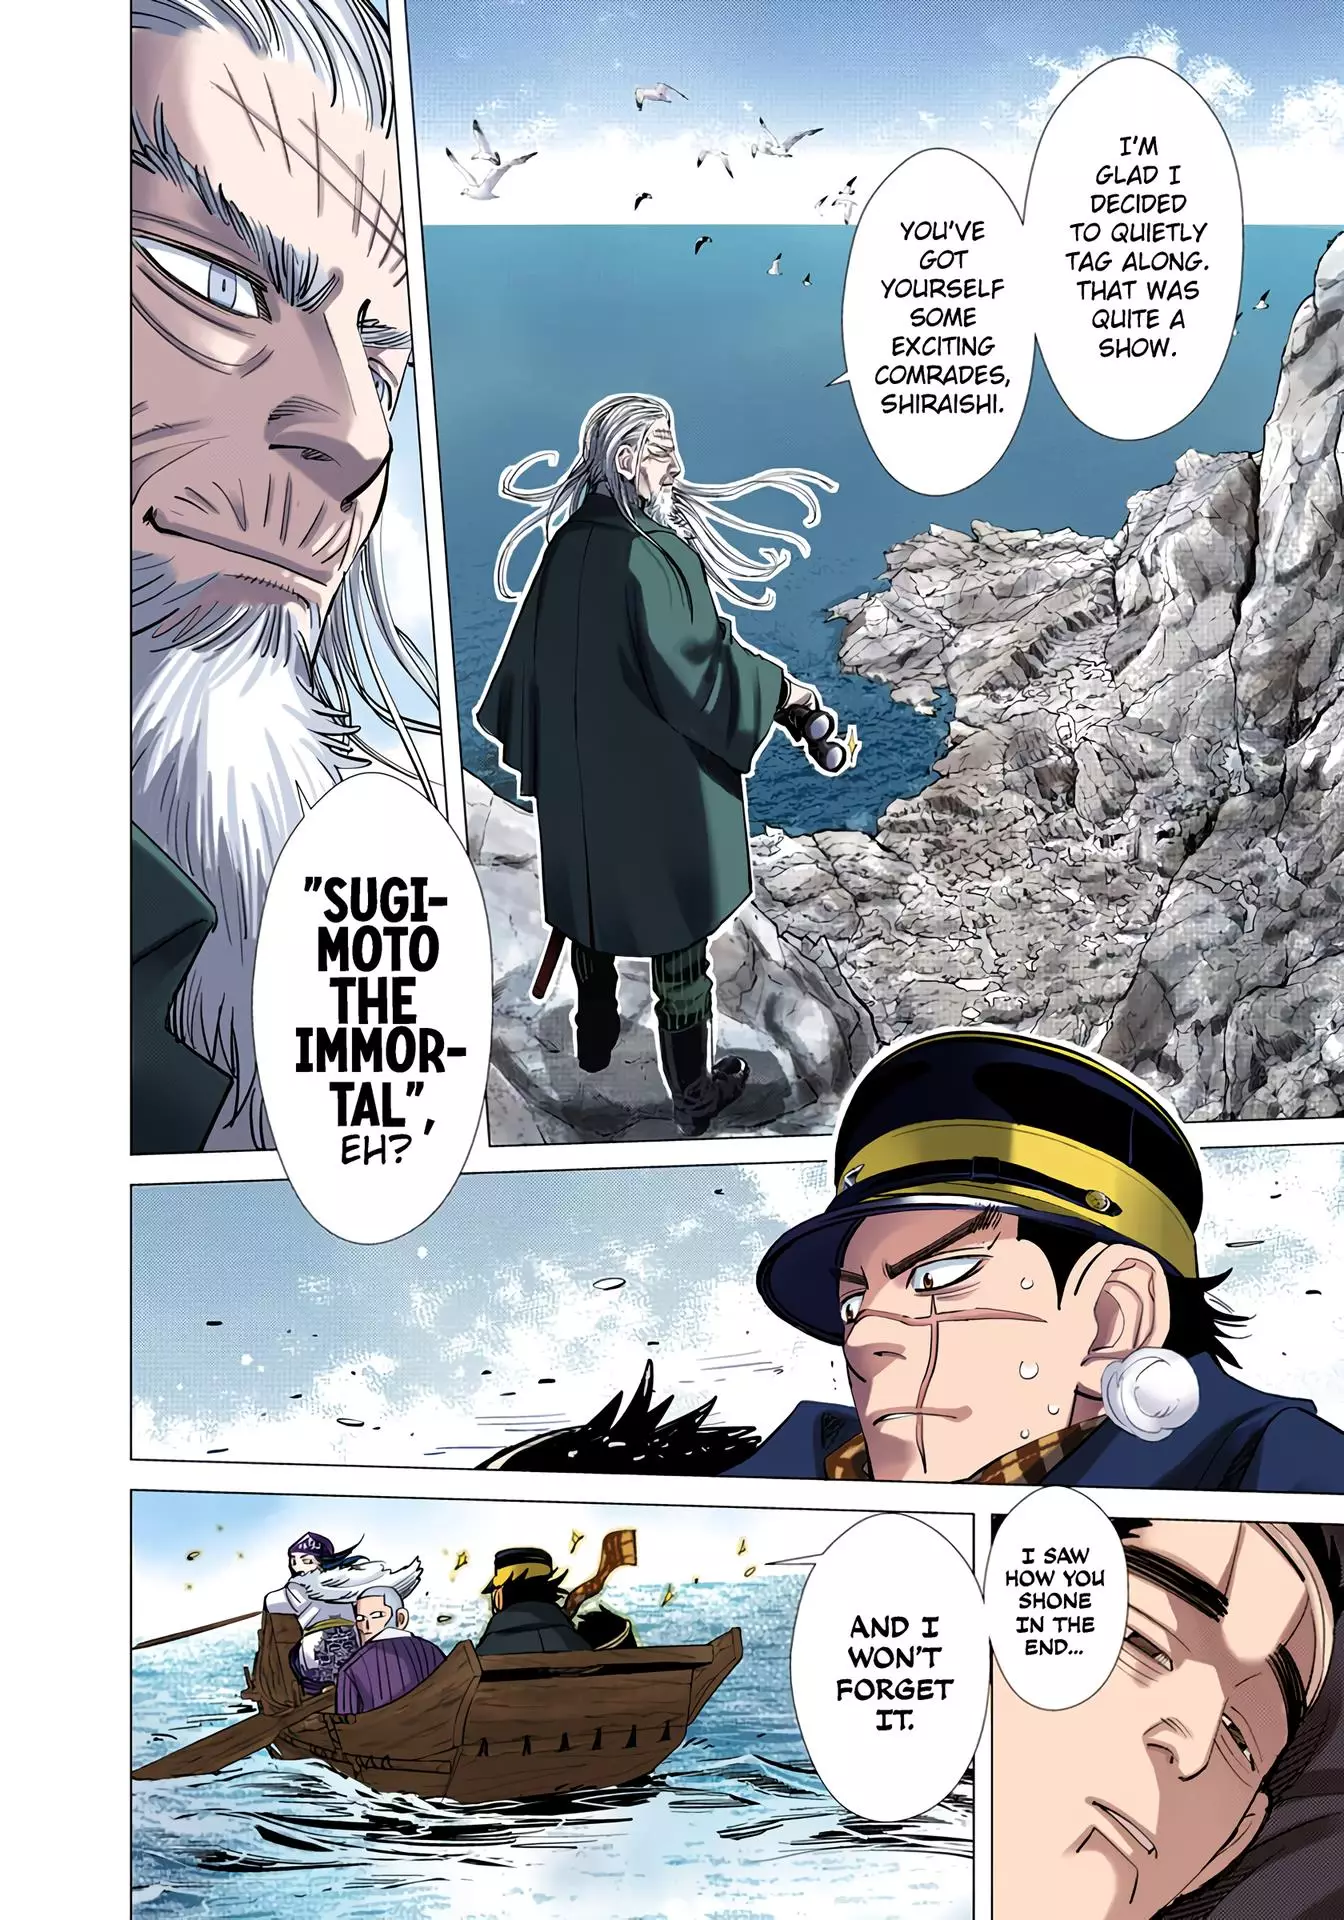 Golden Kamuy - Digital Colored Comics - 41 page 17-17316803